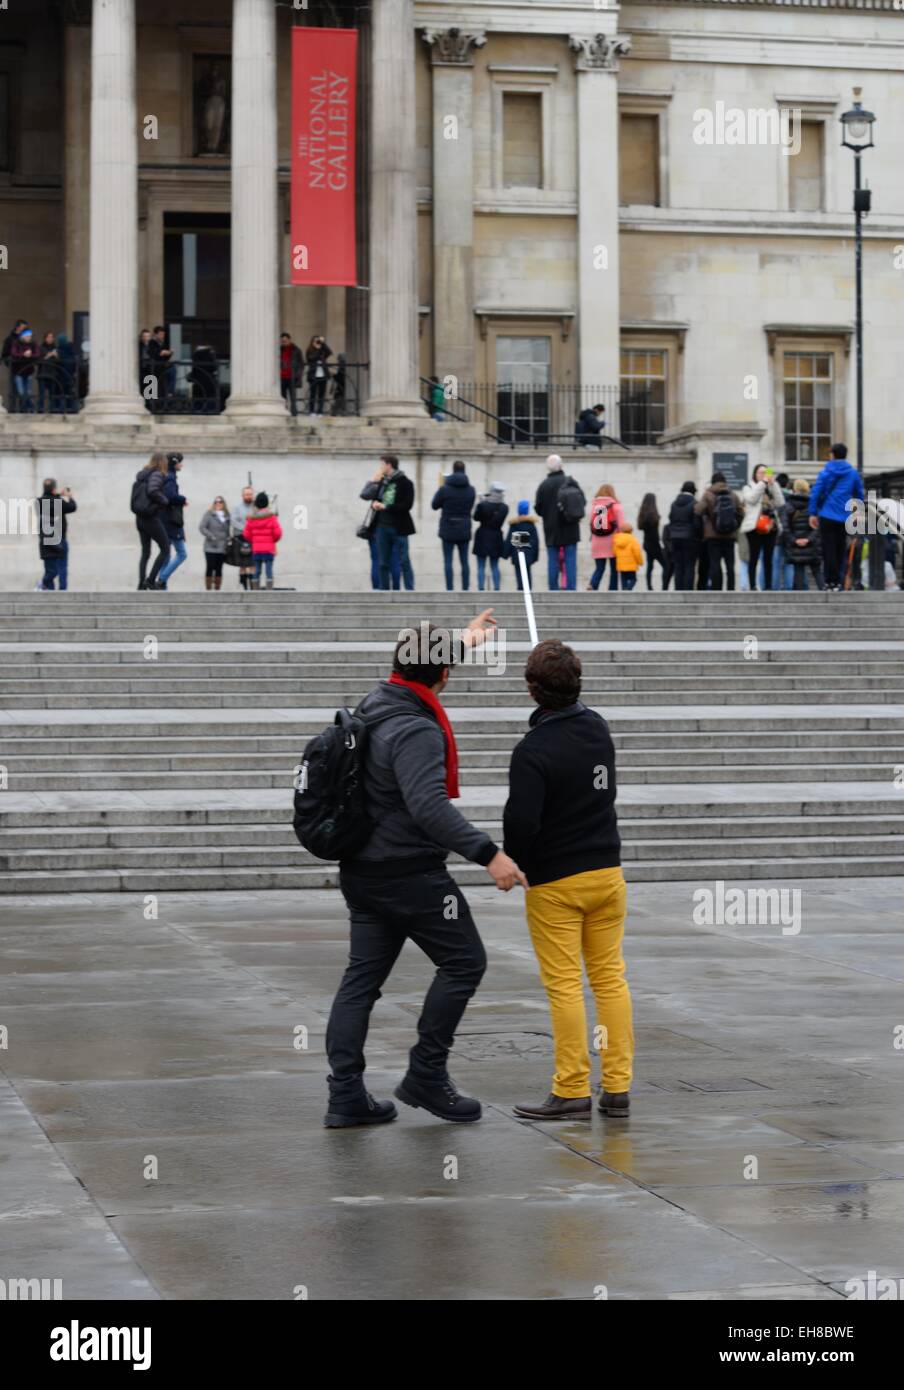 Tourists taking a selfie using an extension stick in Trafalgar Square, London. Stock Photo